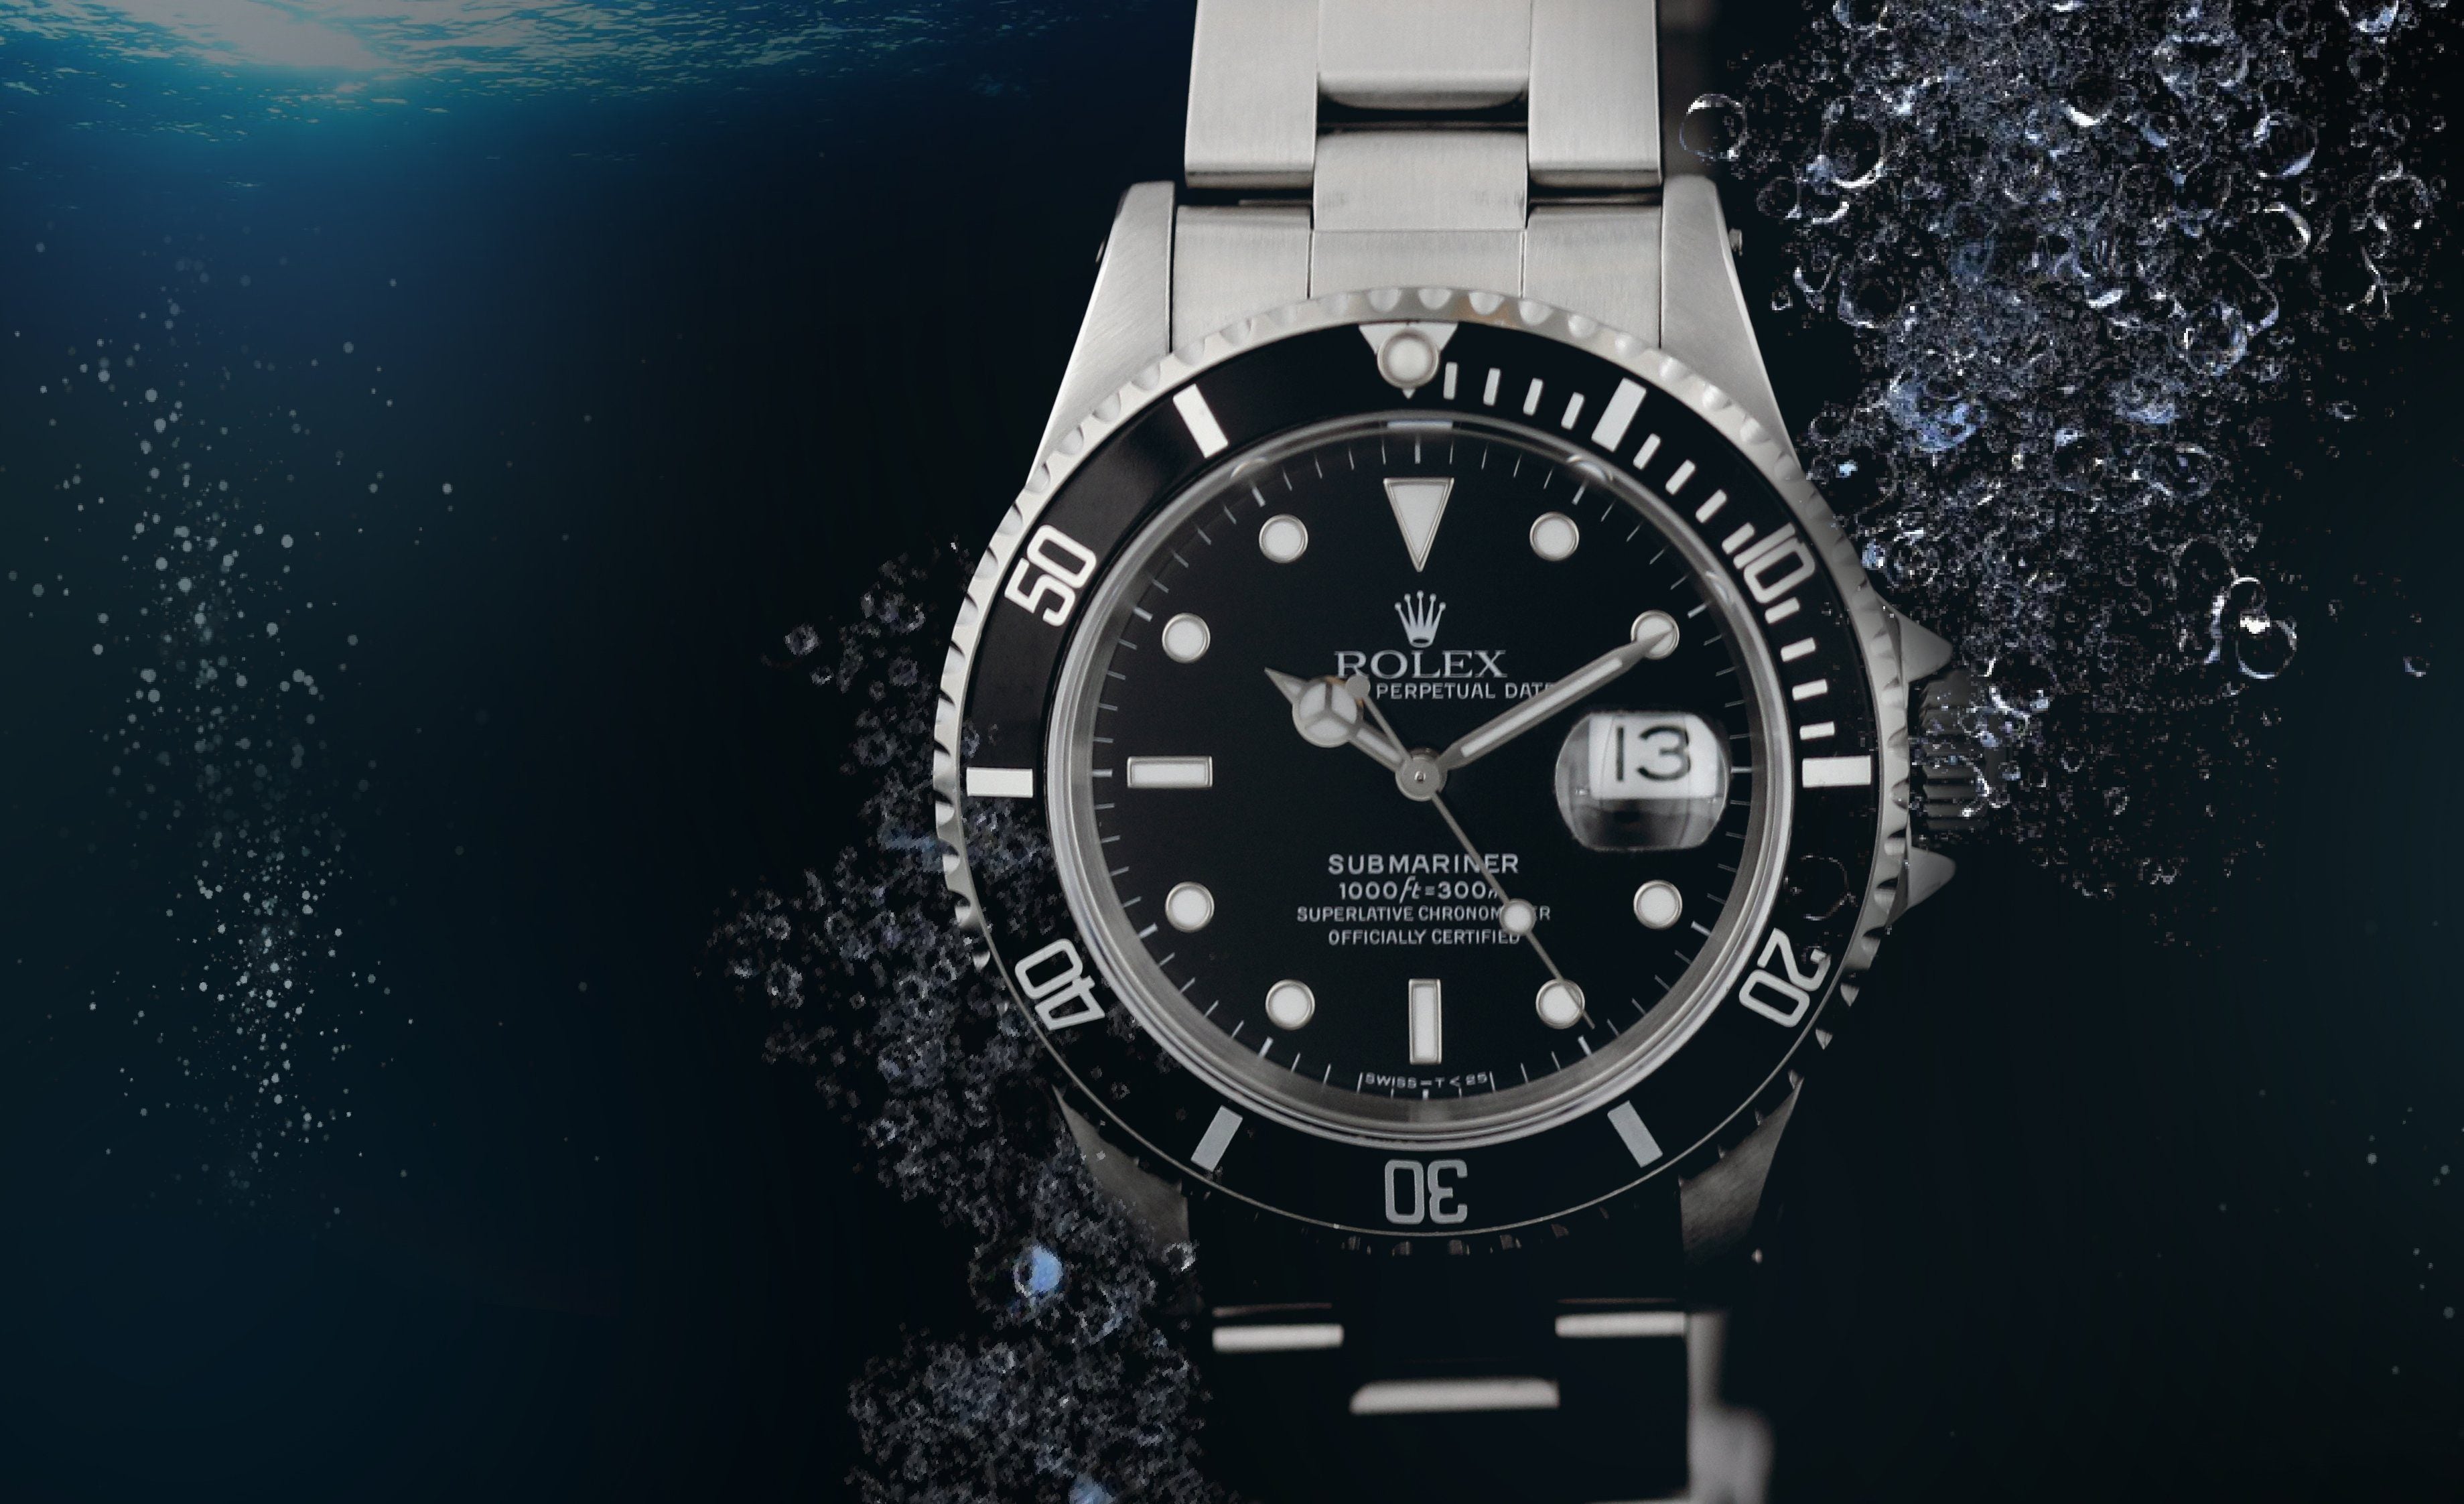 Phigora's Top Five: The Best Pre-Owned Dive Watches